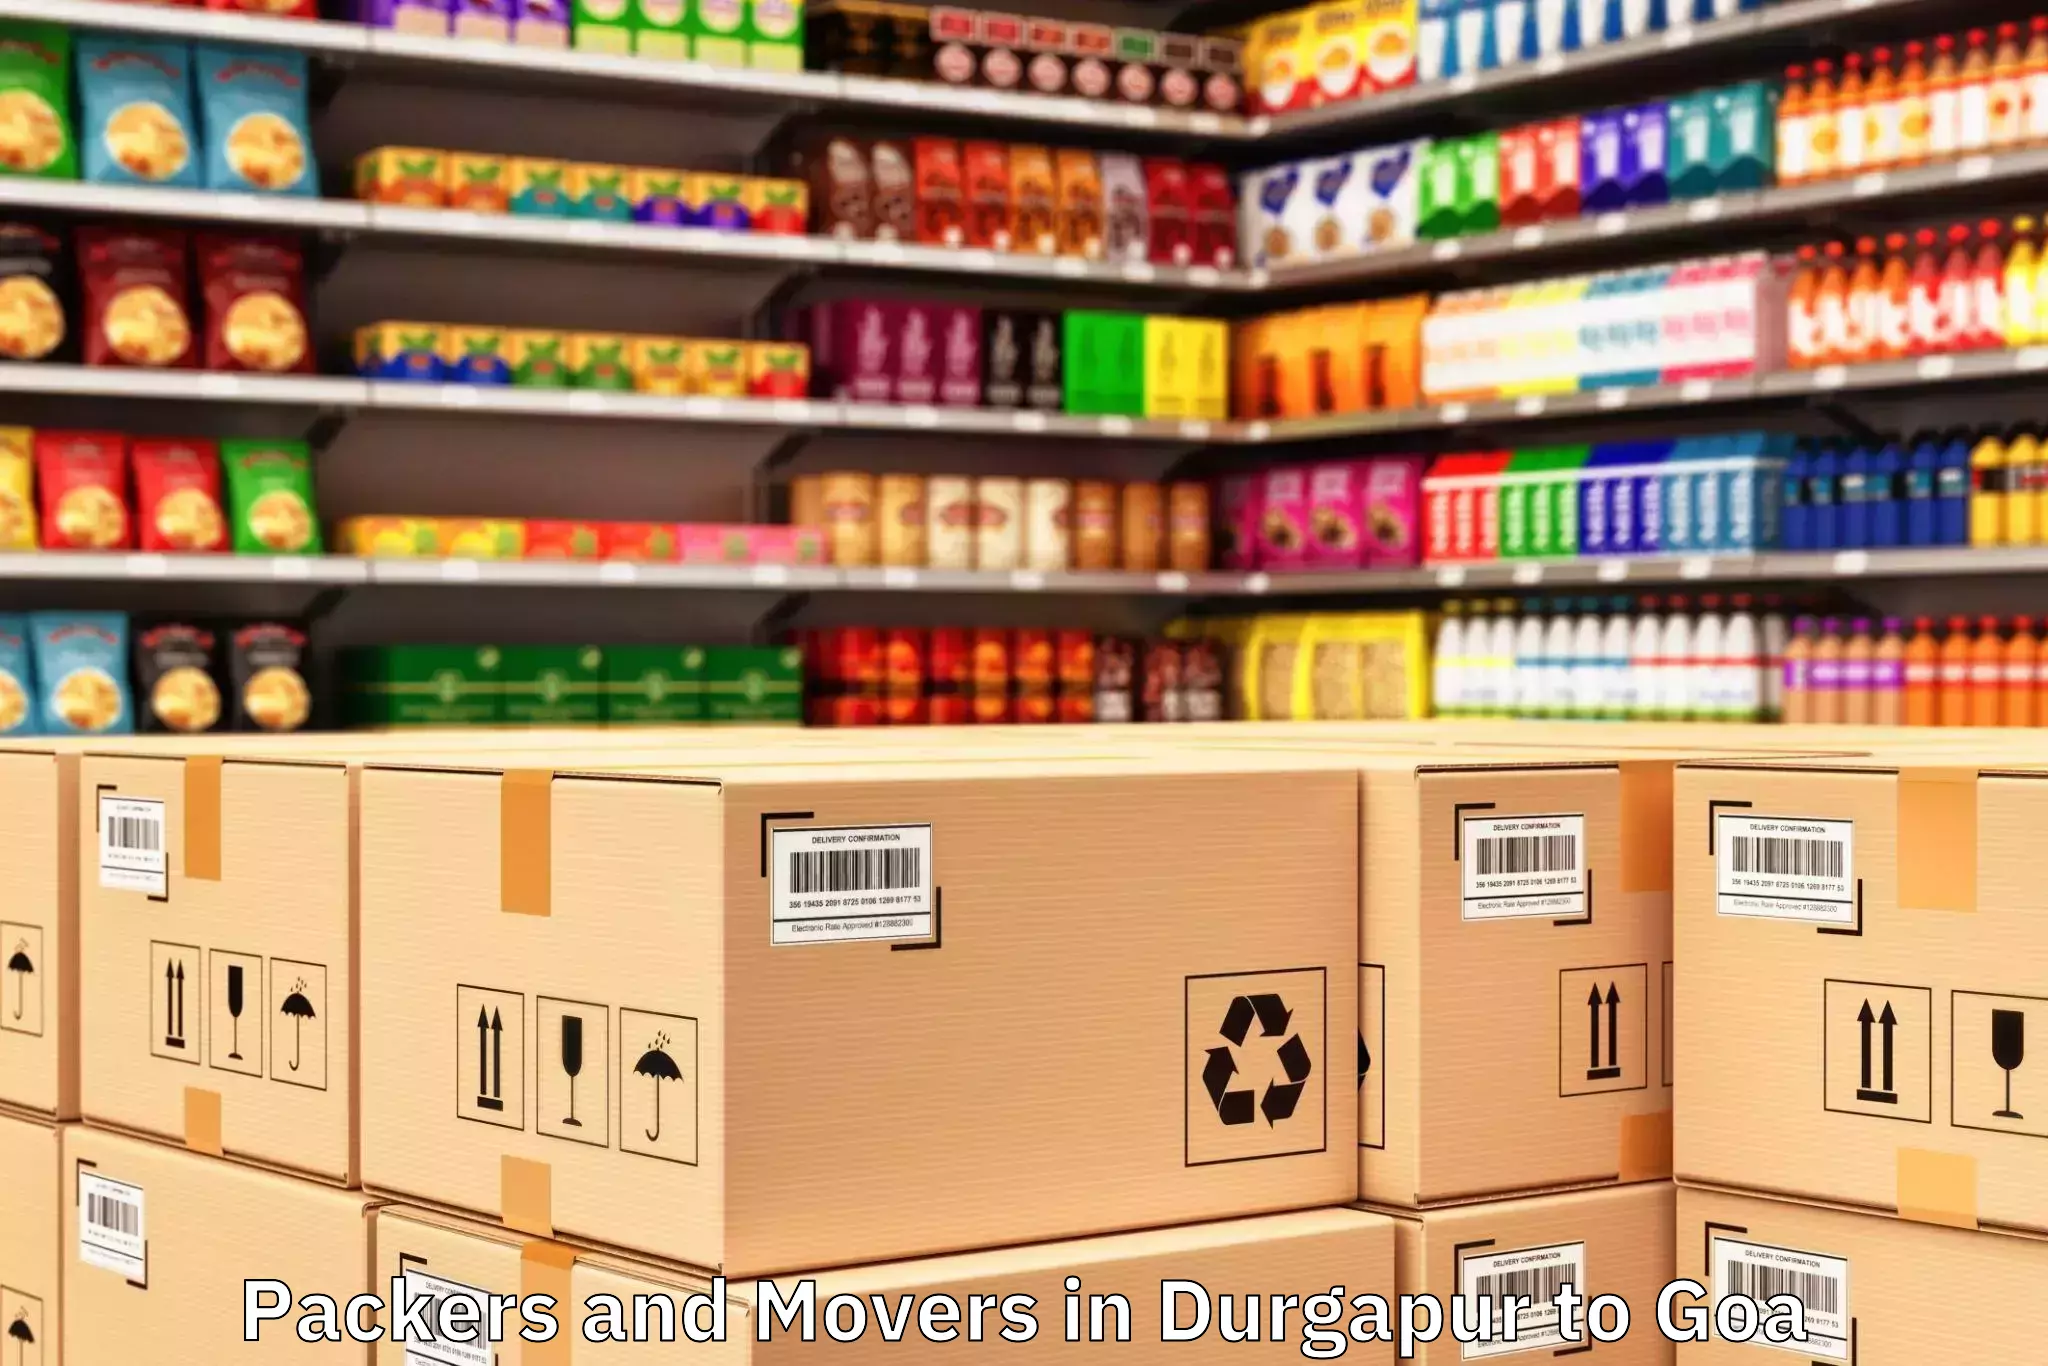 Efficient Durgapur to Vagator Packers And Movers